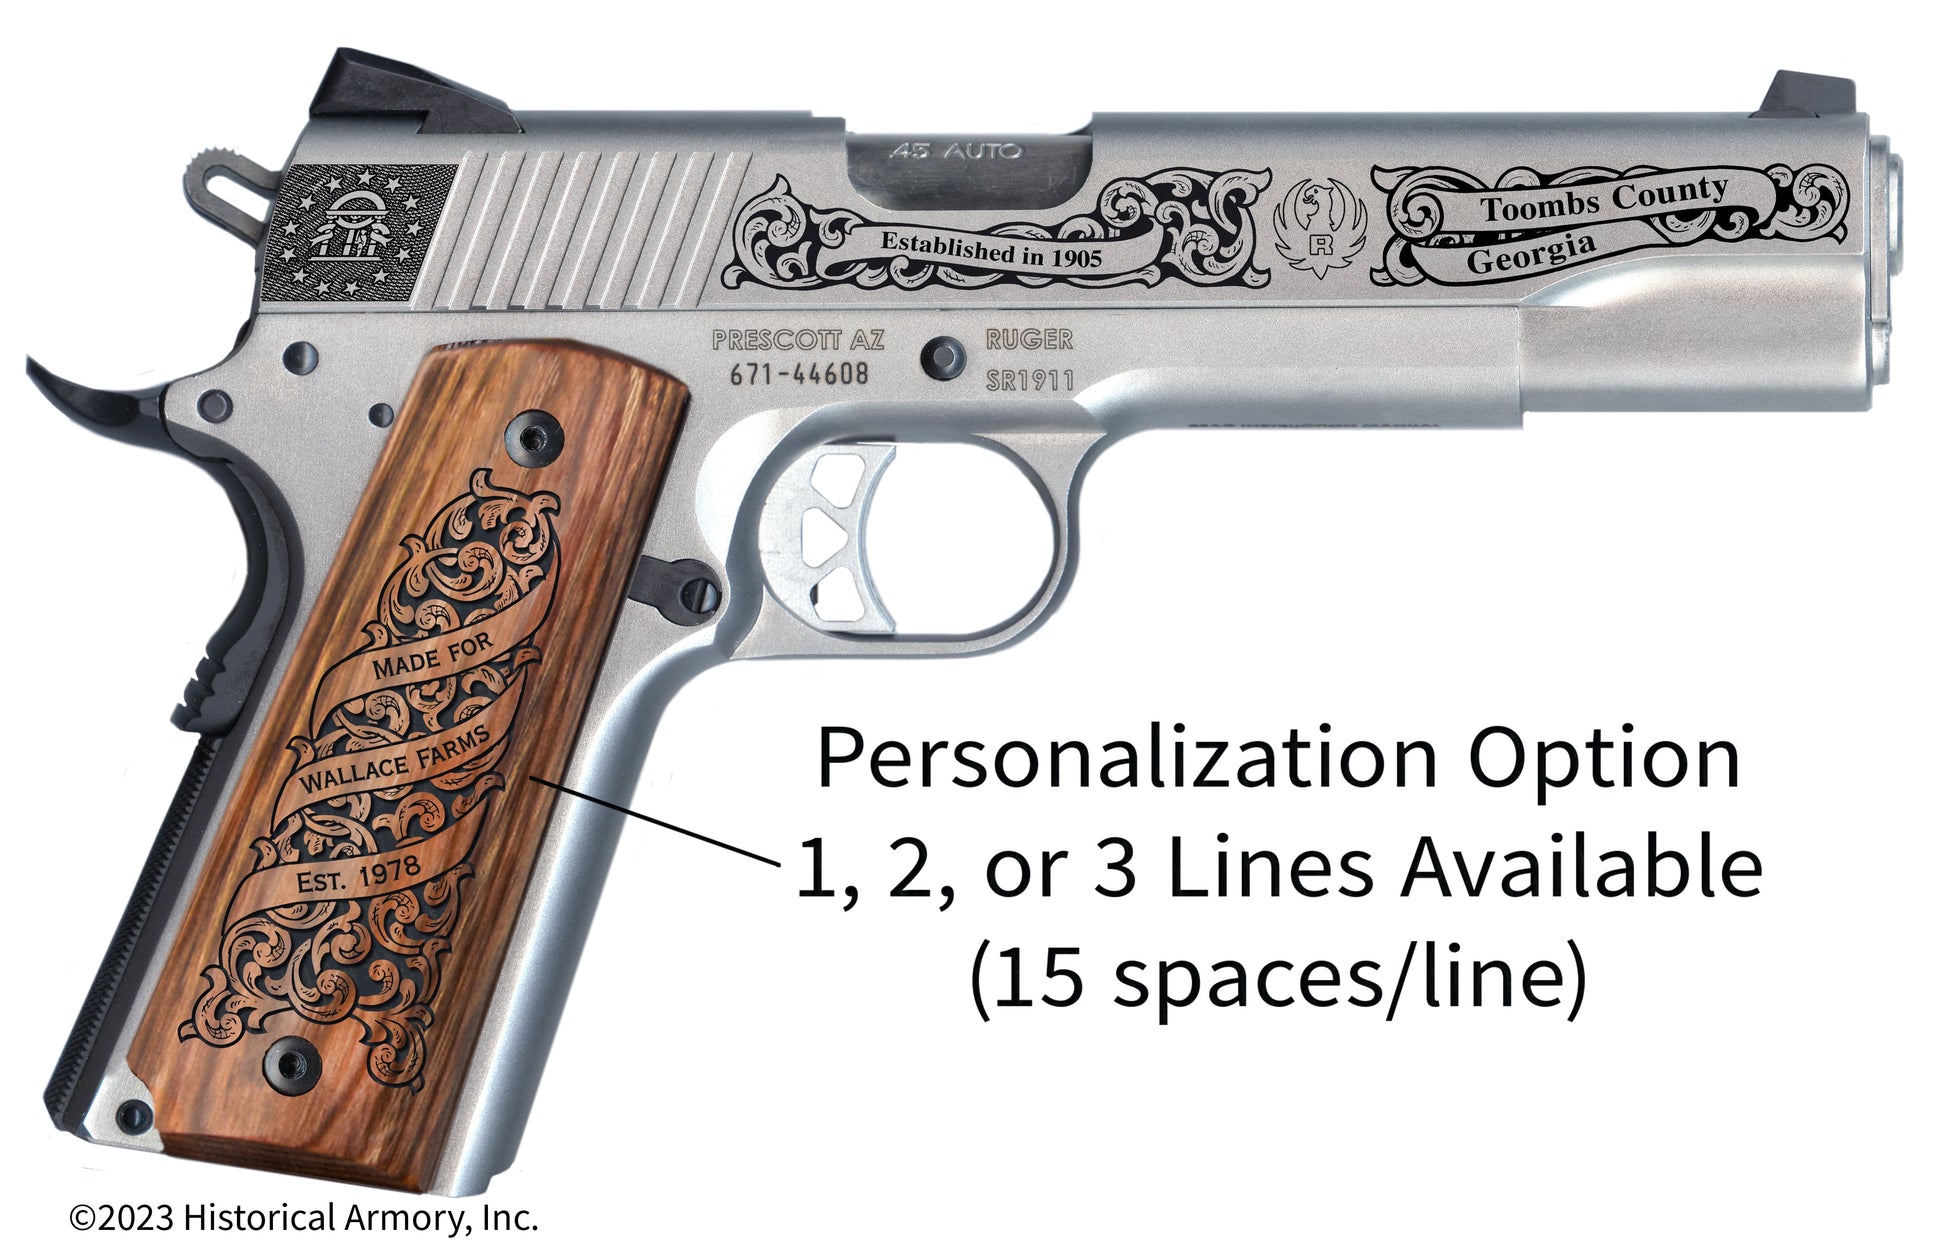 Toombs County Georgia Personalized Engraved .45 Auto Ruger 1911